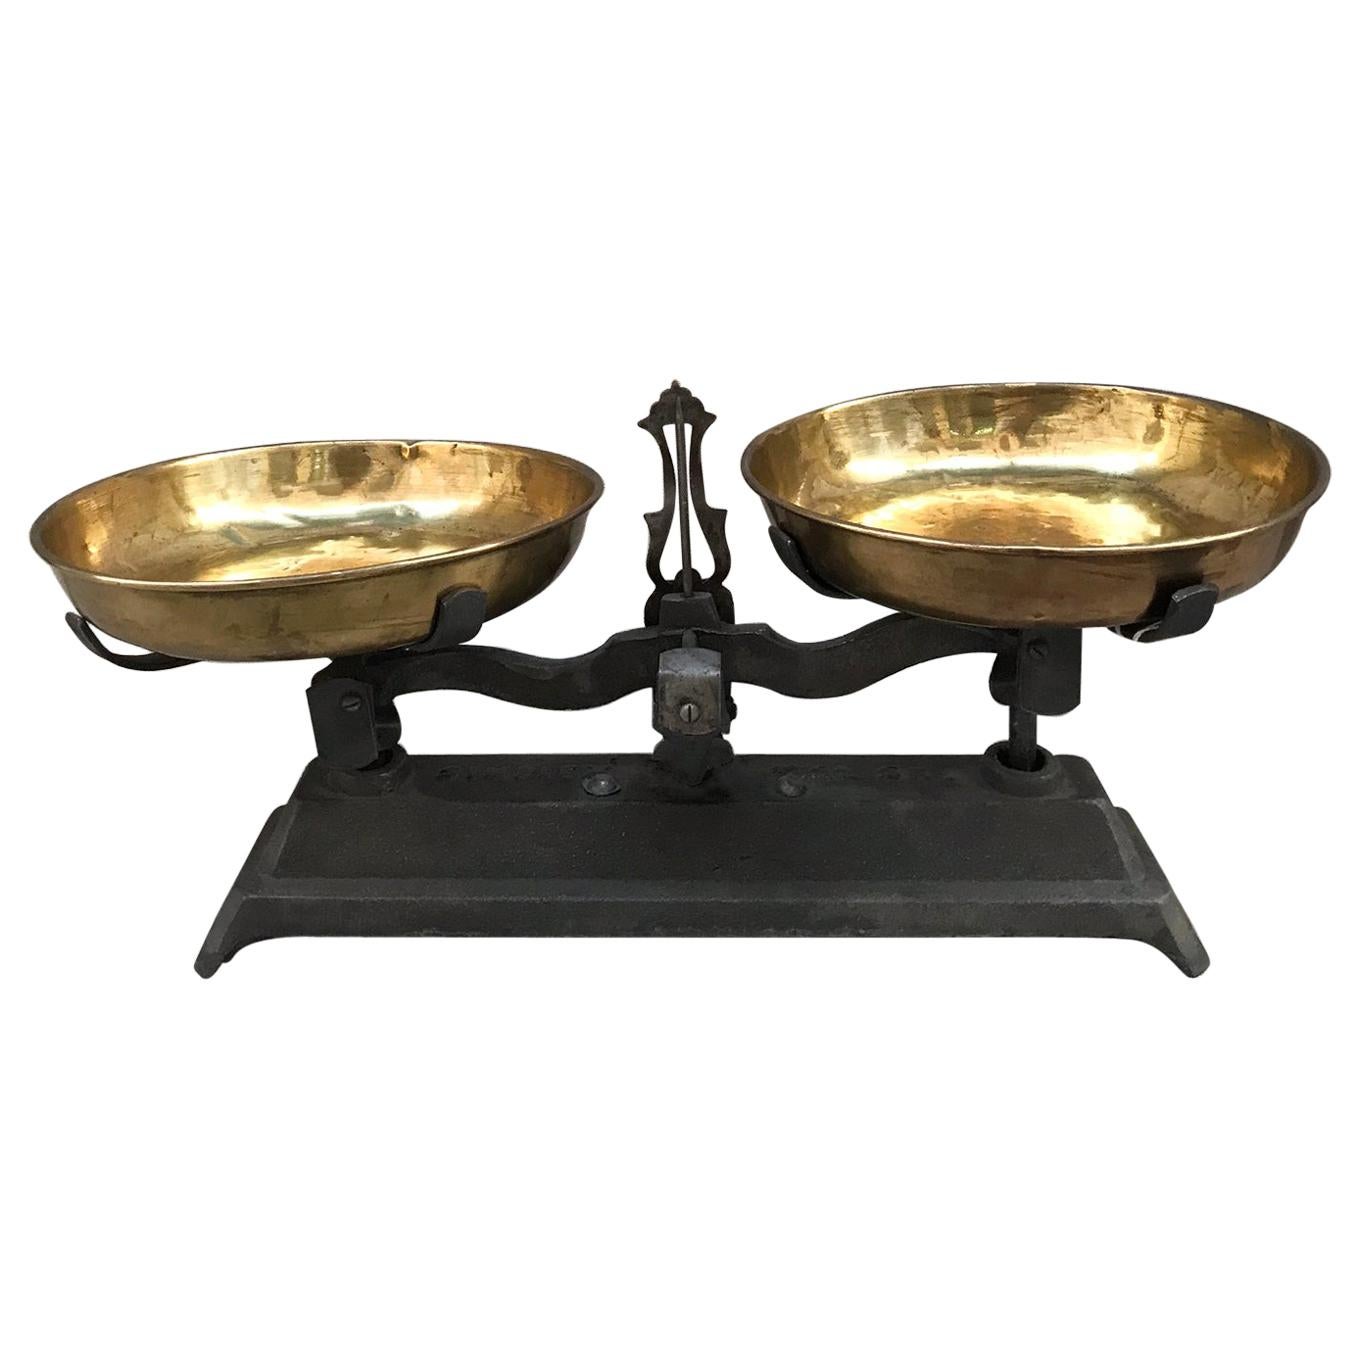 Original Early 20th Century Weight Scale with Cast Iron and Gilded Brass For Sale